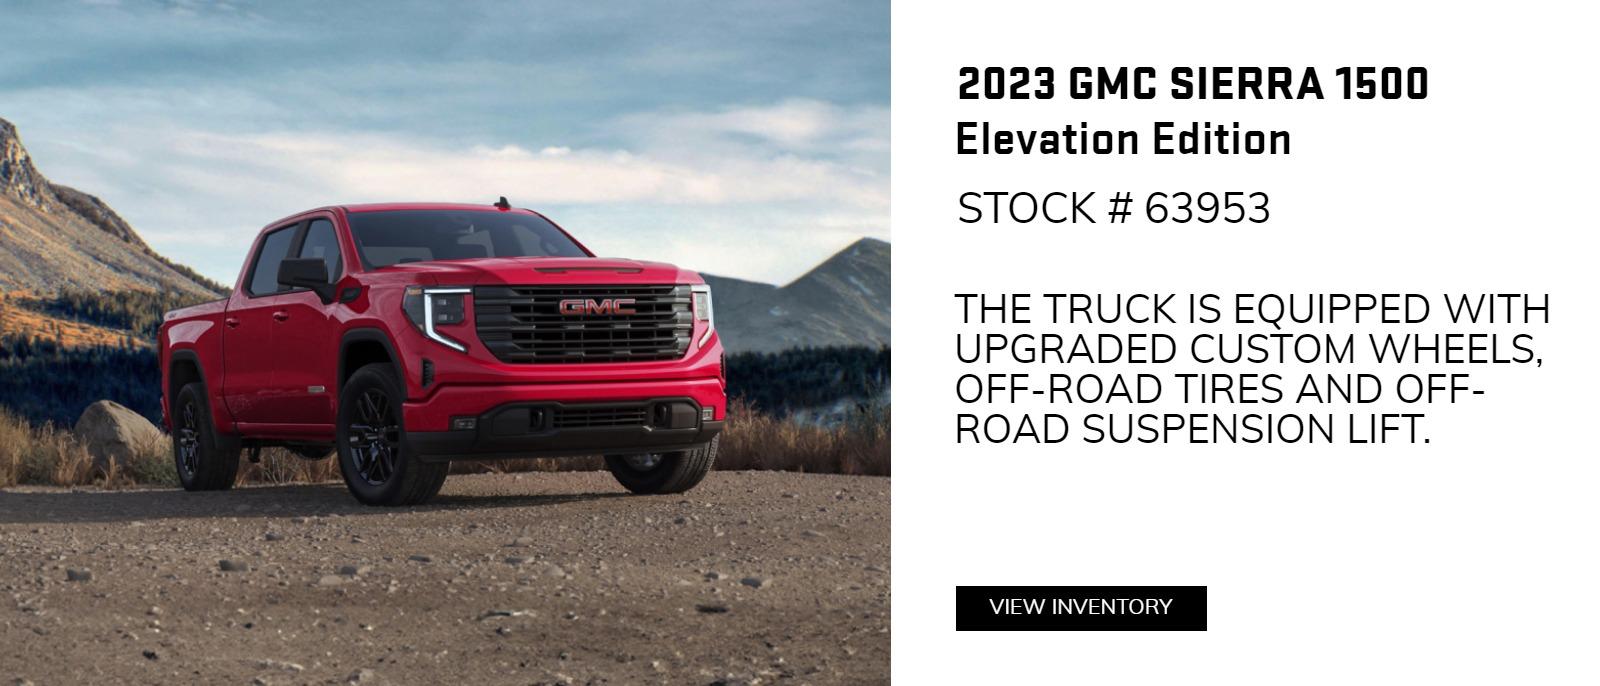 2023 GMC Sierra 1500 Elevation Edition Stk # 63953 (Please use truck image tied to the stock number) Please add wording to this hero tile that the truck is equipped with Upgraded Custom Wheels, Off-road tires and Off-road Suspension Lift.